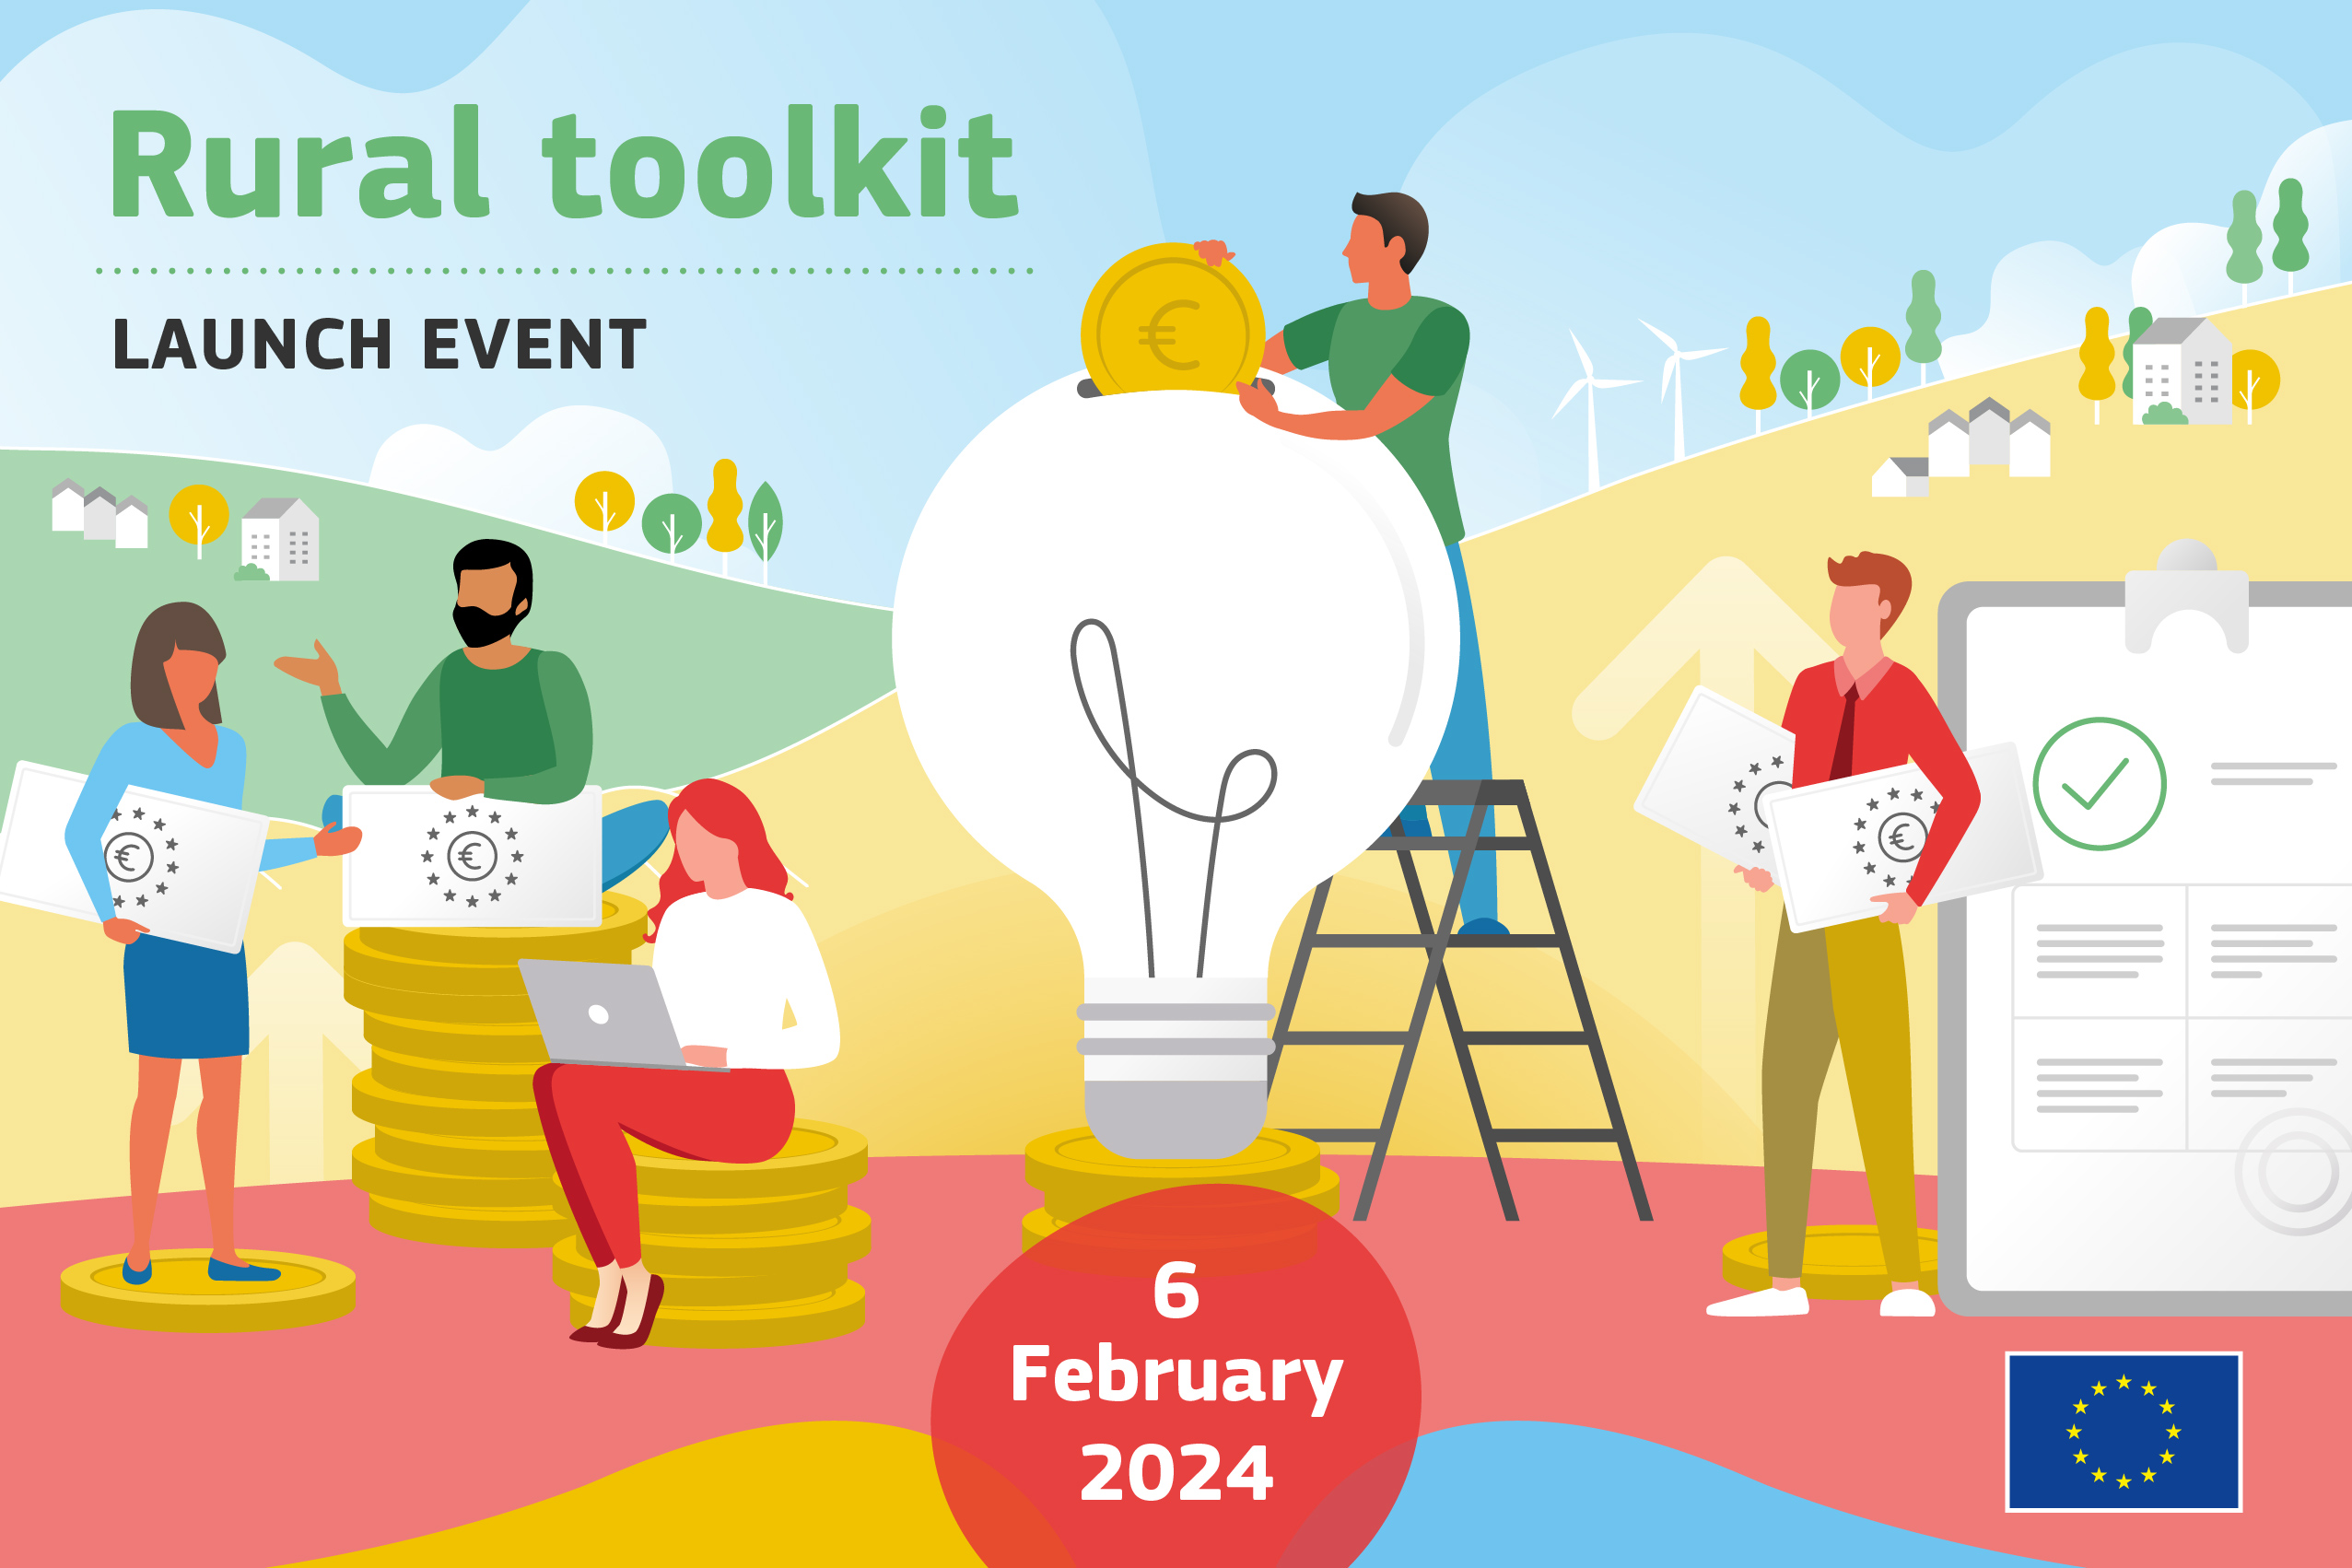 Rural toolkit launch event - 6 February 2024 - Save the date